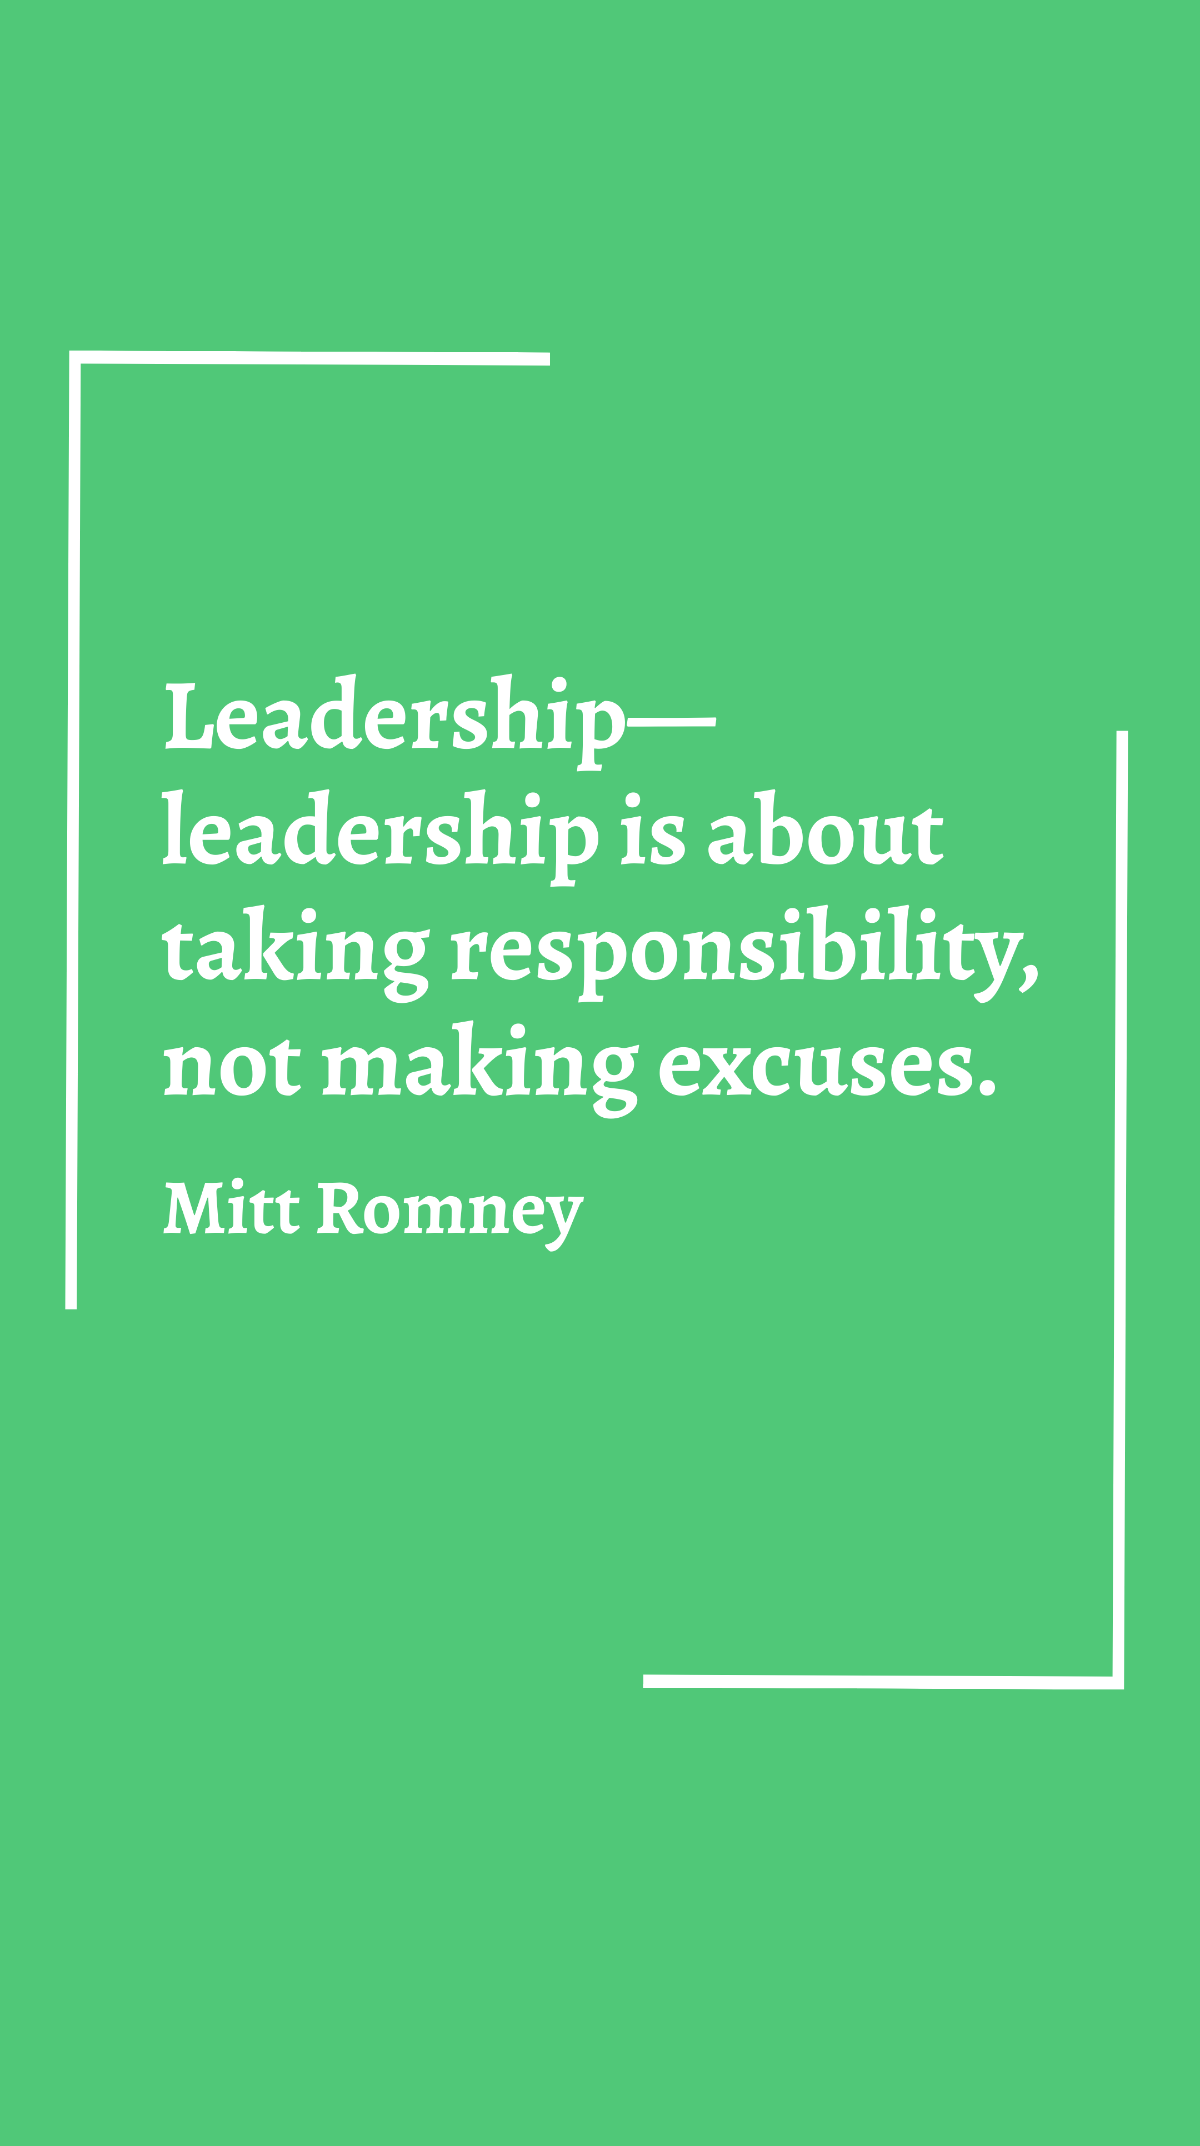 Mitt Romney - Leadership - leadership is about taking responsibility, not making excuses. Template